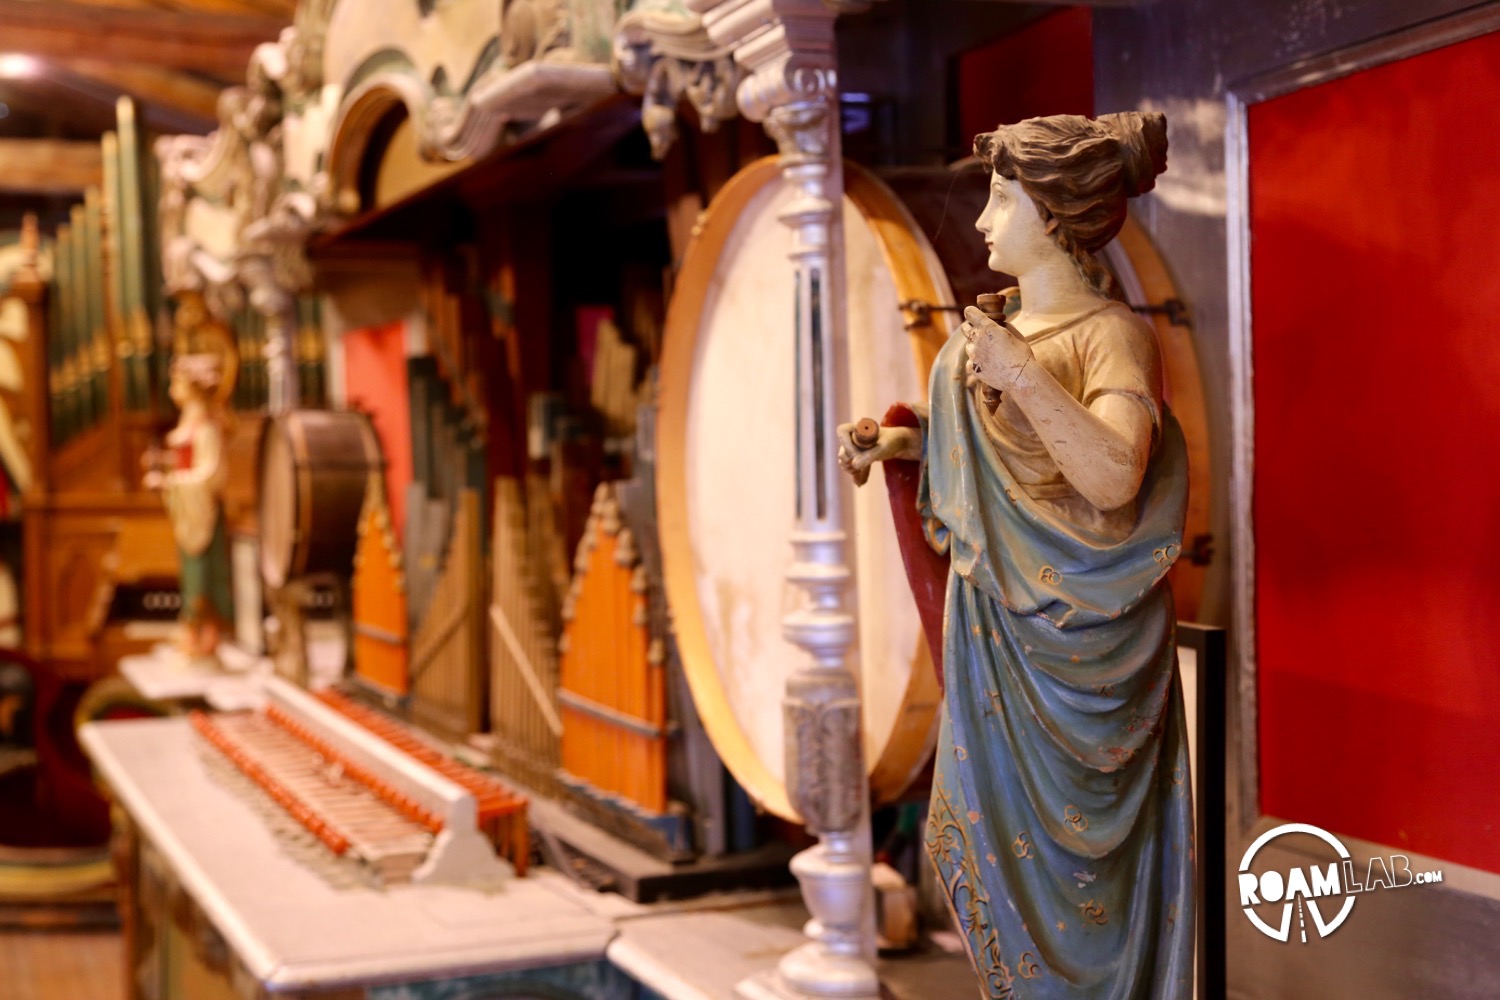 Intricate craftsmanship on display at the Nevada City Music Hall